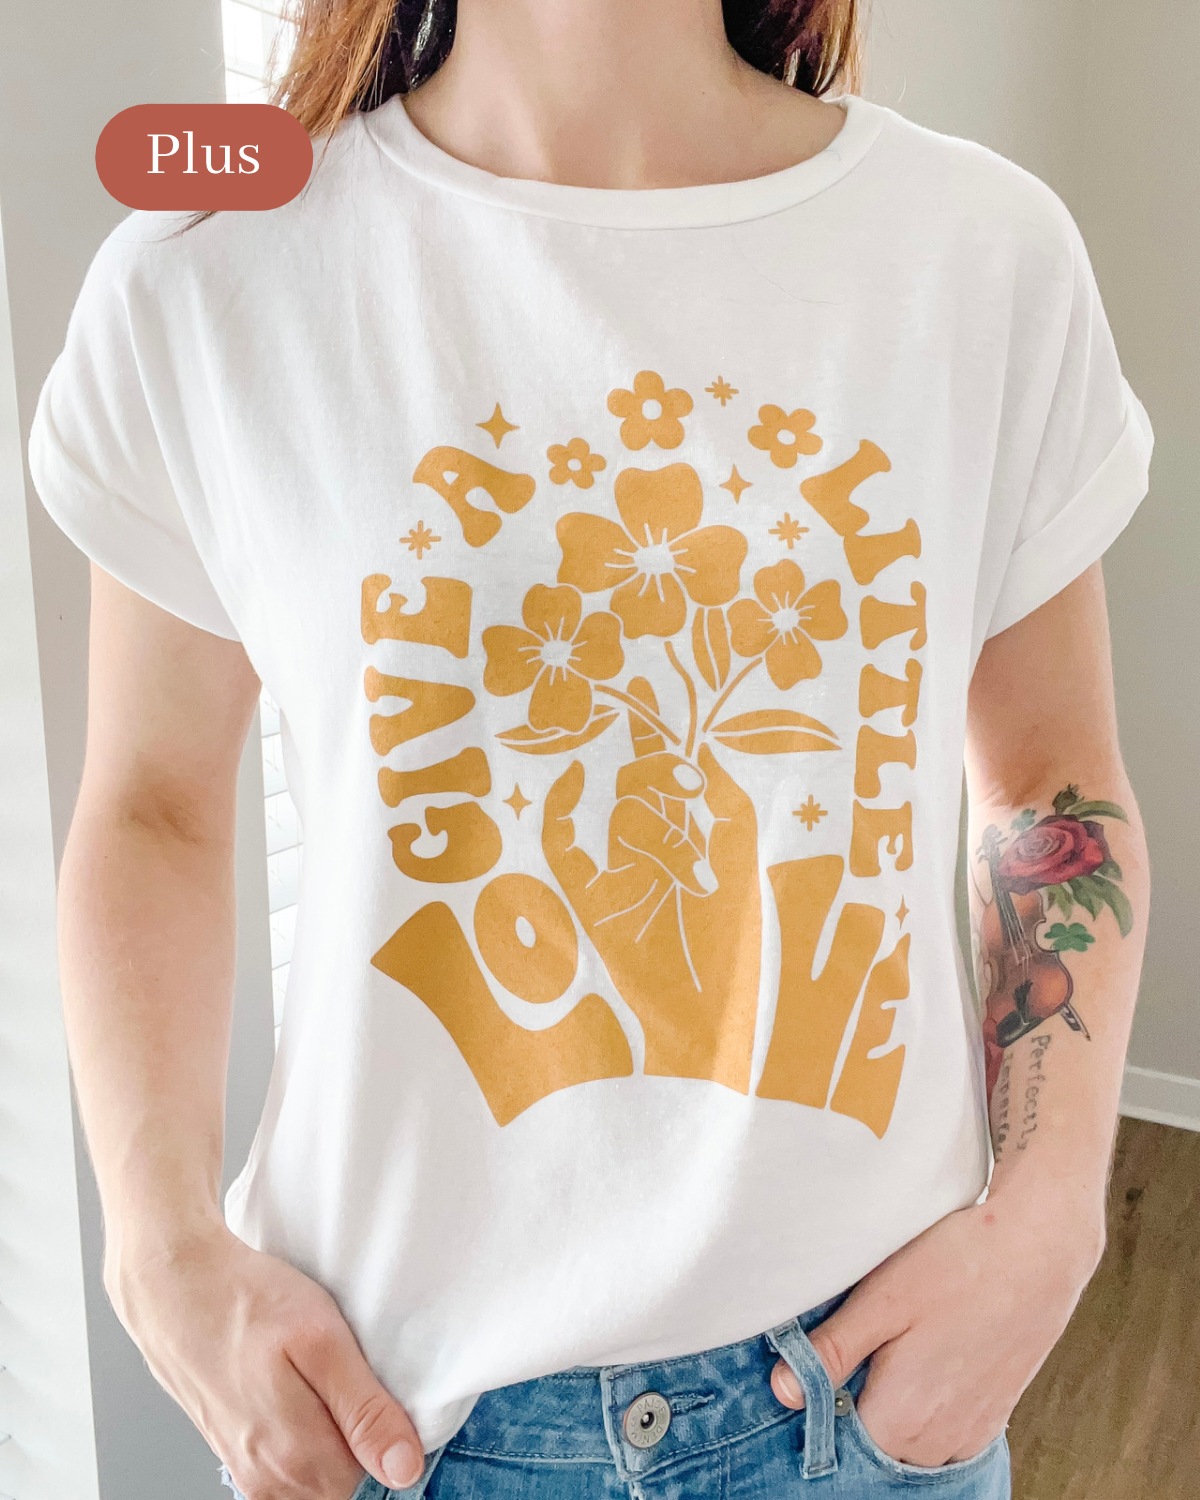 Give A Little Love Tee